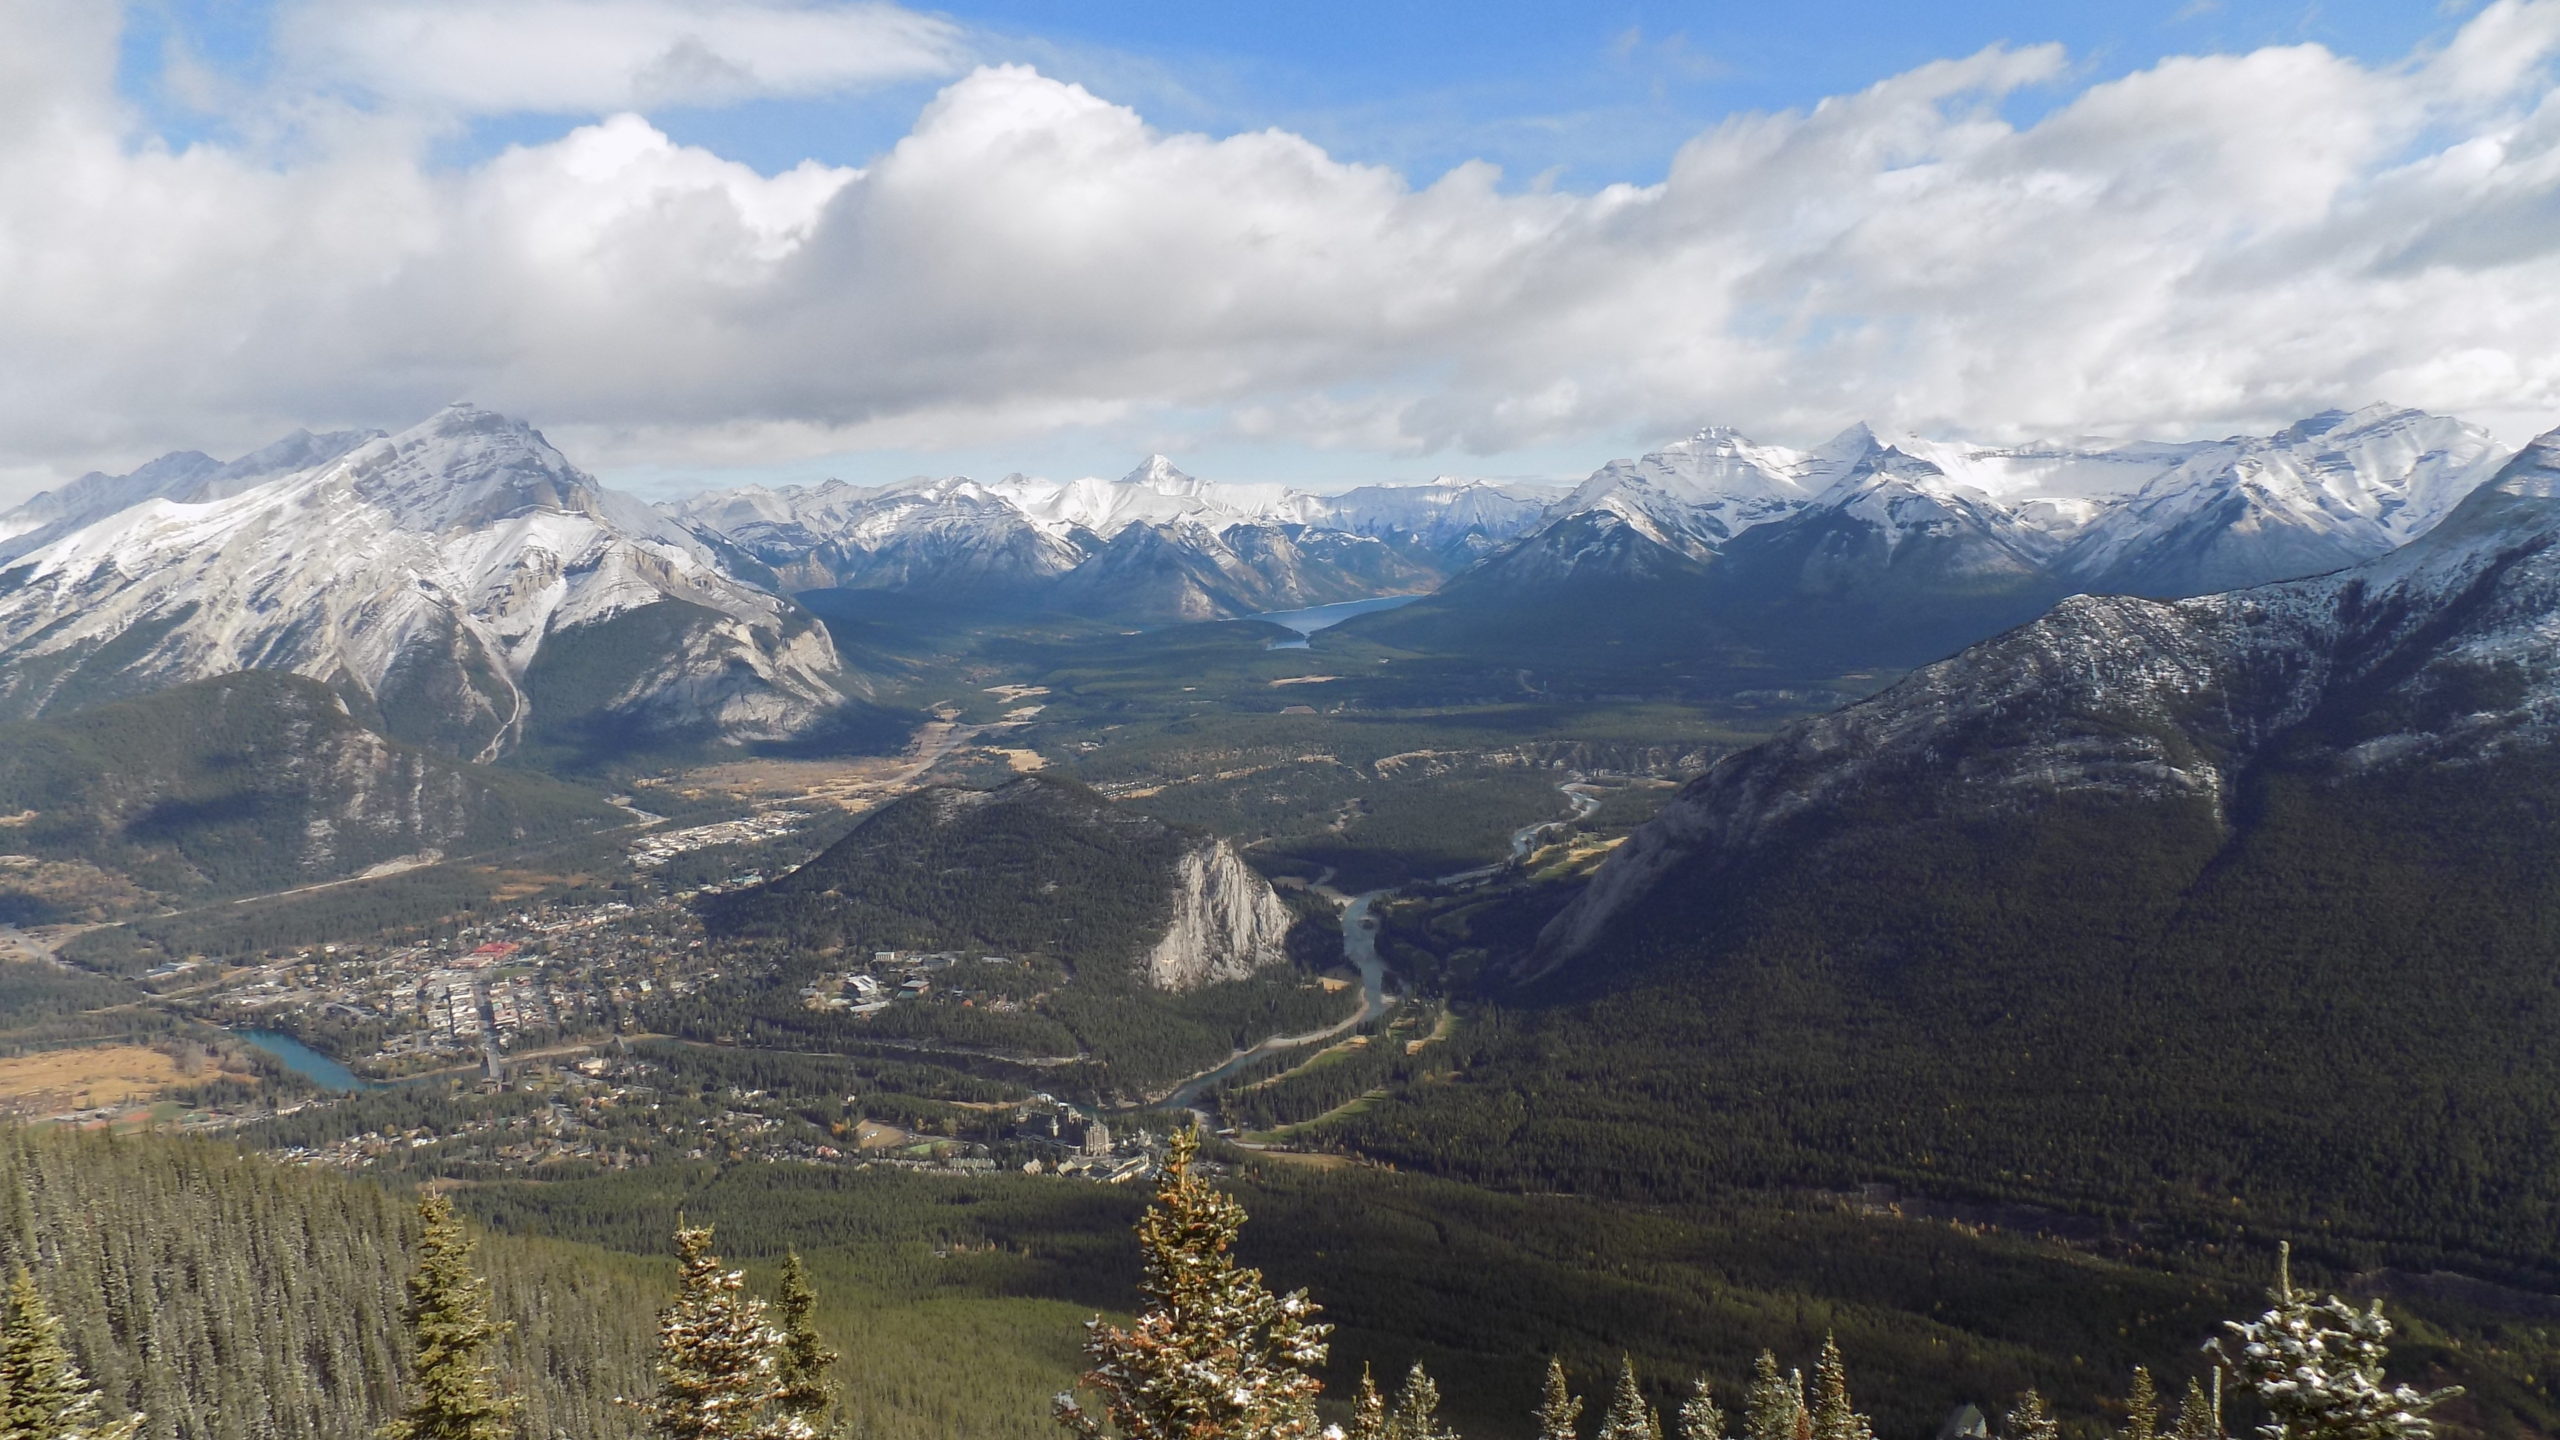 10.7 - 6 - View of Banff from Gondola observation deck